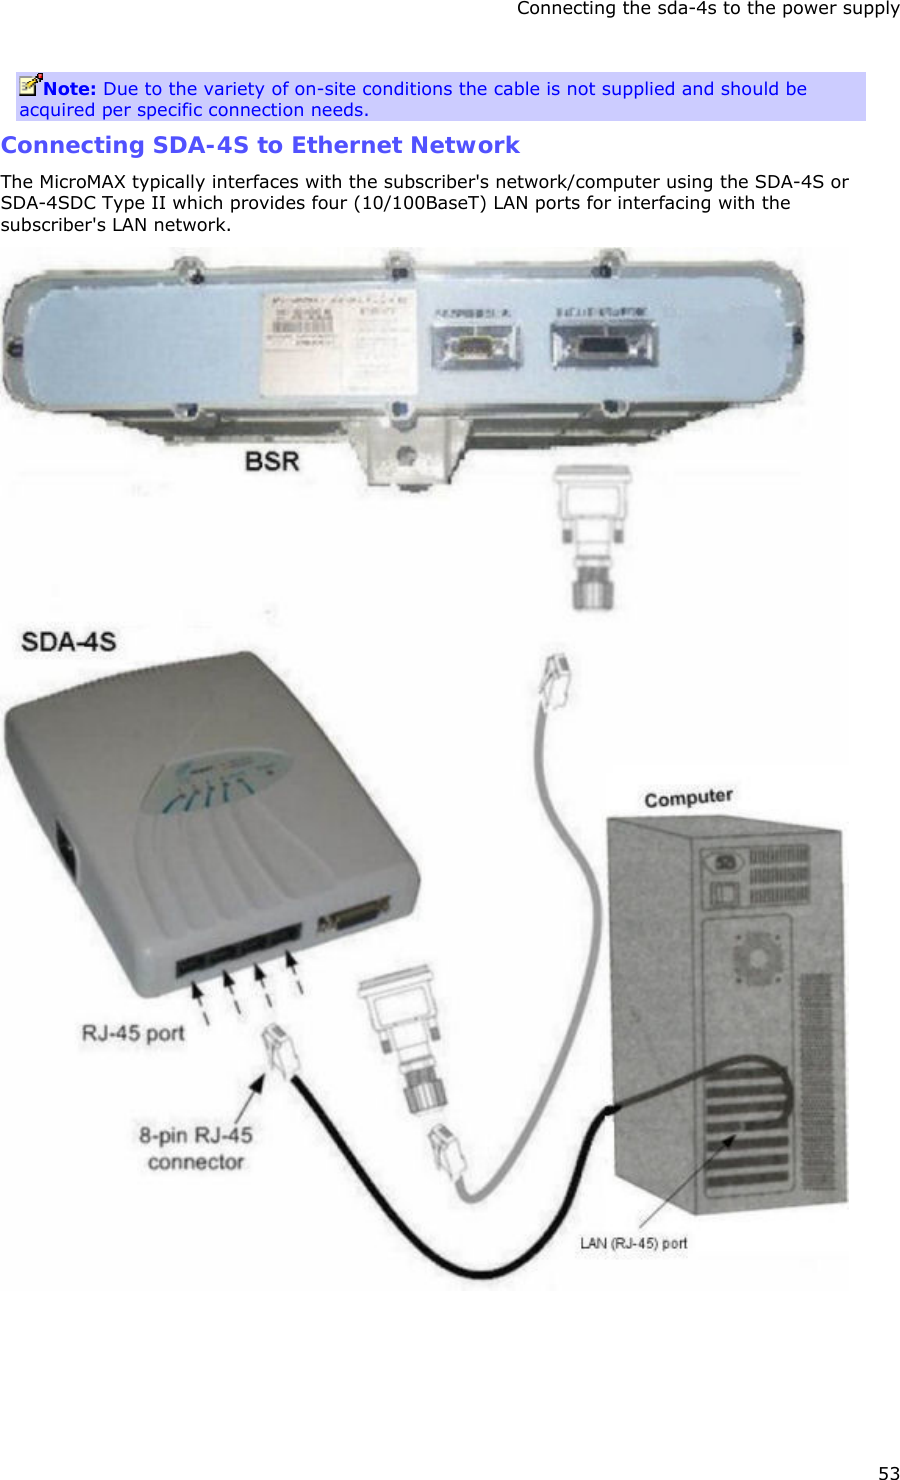 Connecting the sda-4s to the power supply 53 Note: Due to the variety of on-site conditions the cable is not supplied and should be acquired per specific connection needs. Connecting SDA-4S to Ethernet Network The MicroMAX typically interfaces with the subscriber&apos;s network/computer using the SDA-4S or SDA-4SDC Type II which provides four (10/100BaseT) LAN ports for interfacing with the subscriber&apos;s LAN network.  